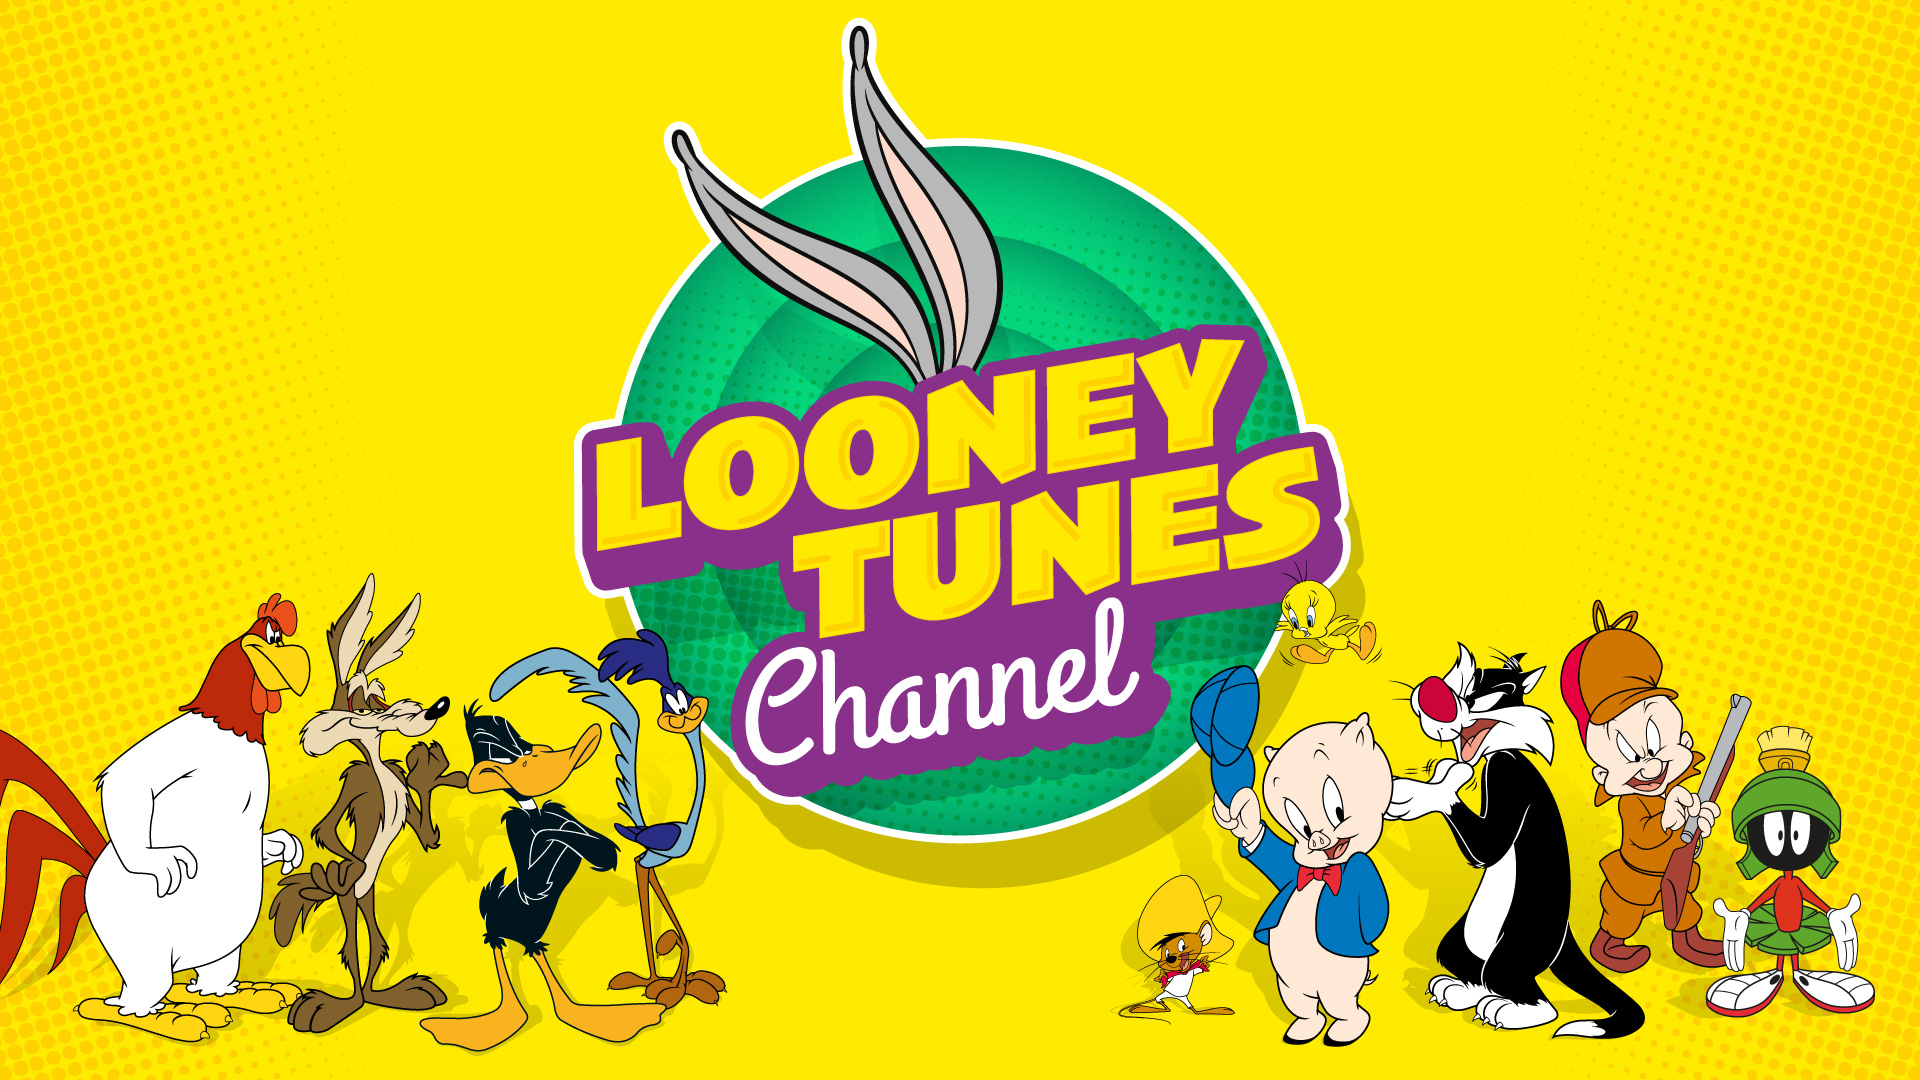 Looney Tunes Channel